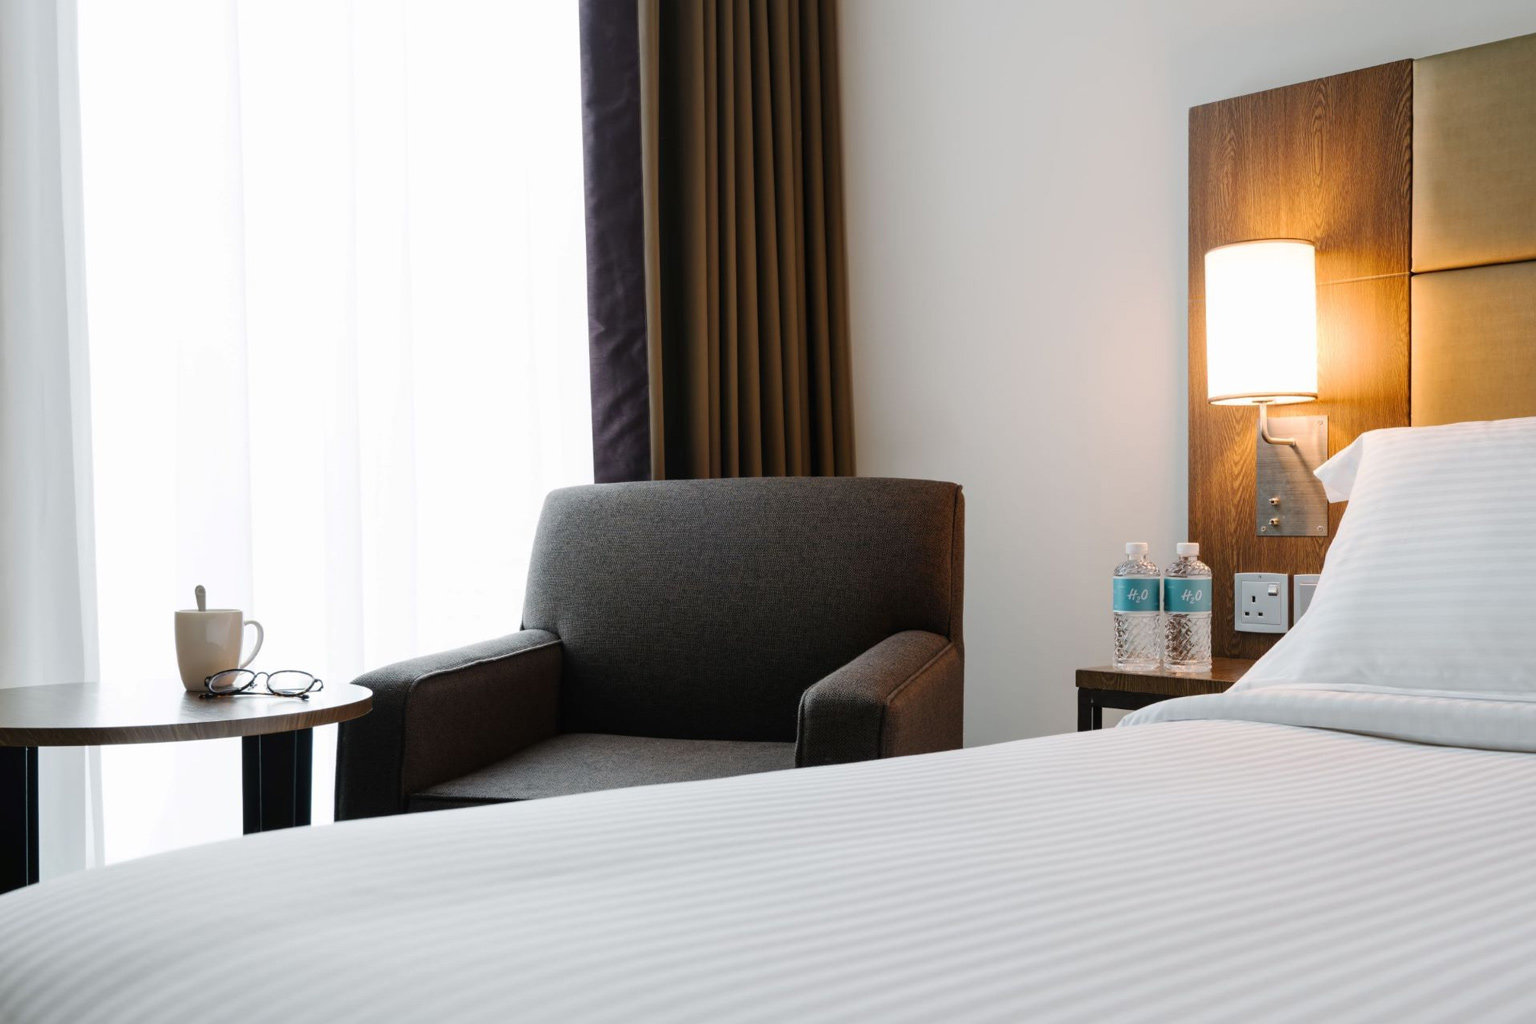 accessible hotels singapore